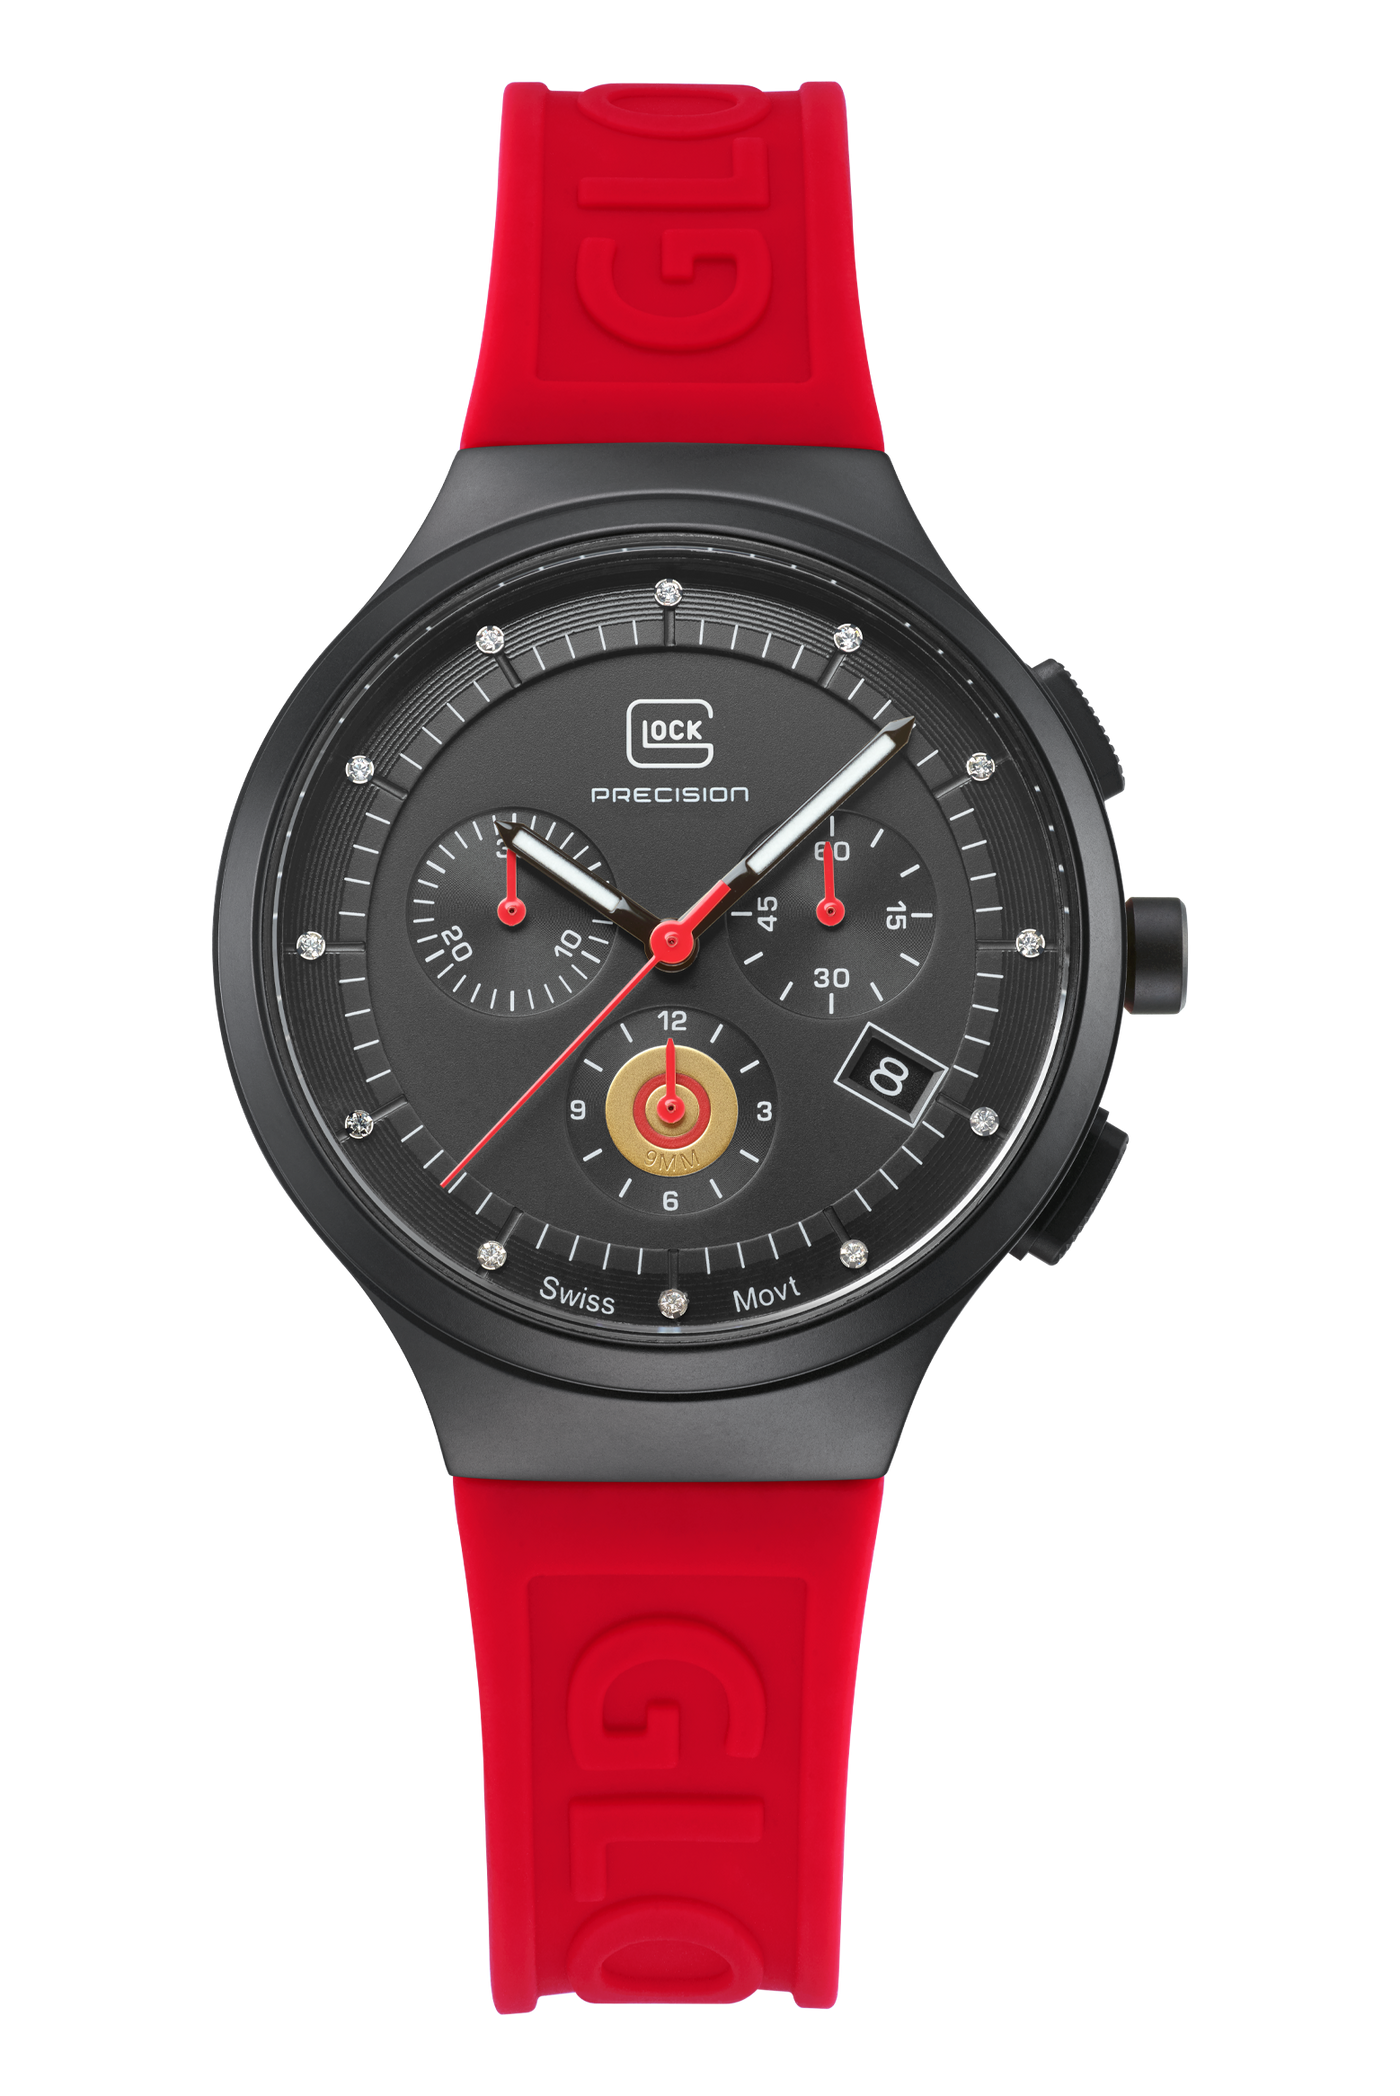 Mid-Size Black Steel Glock Watch with Black and Red Dial